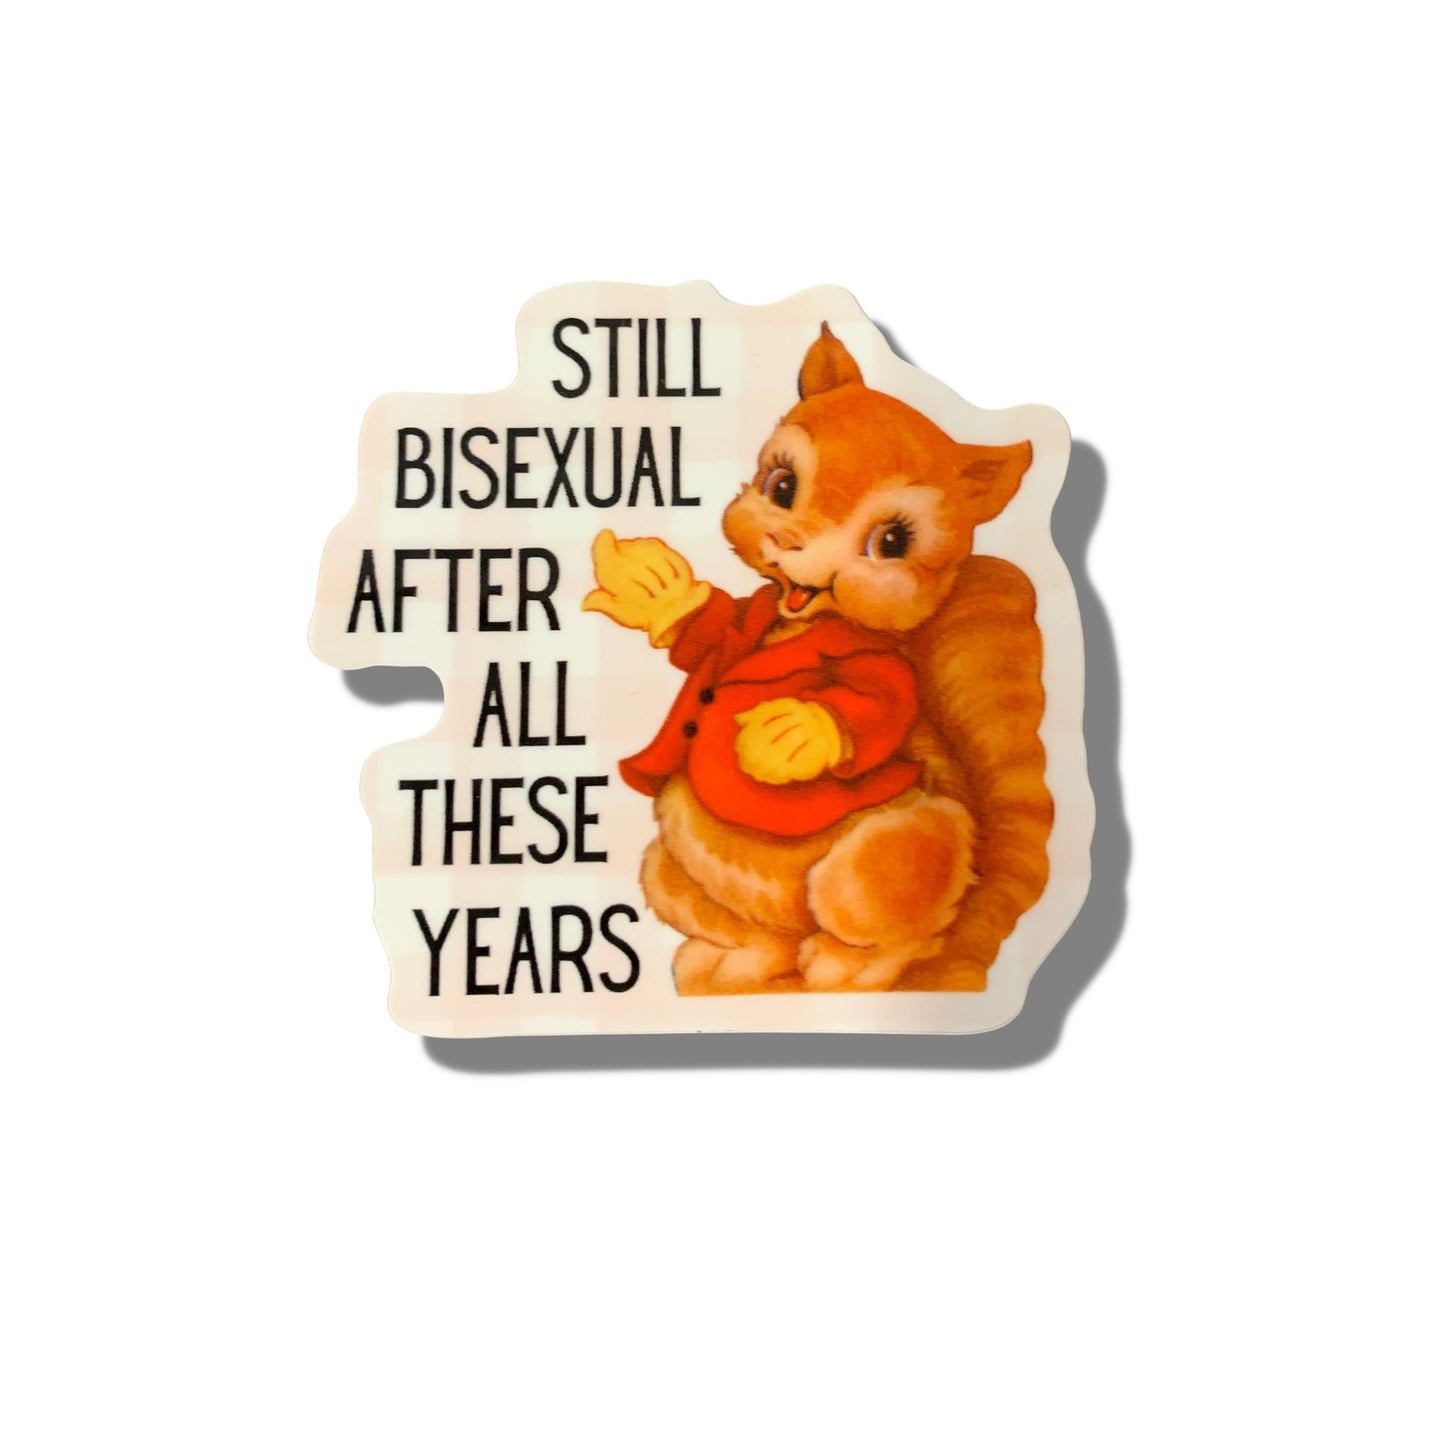 Still Bisexual After All These Years Vinyl Sticker | LGBTQ Pride